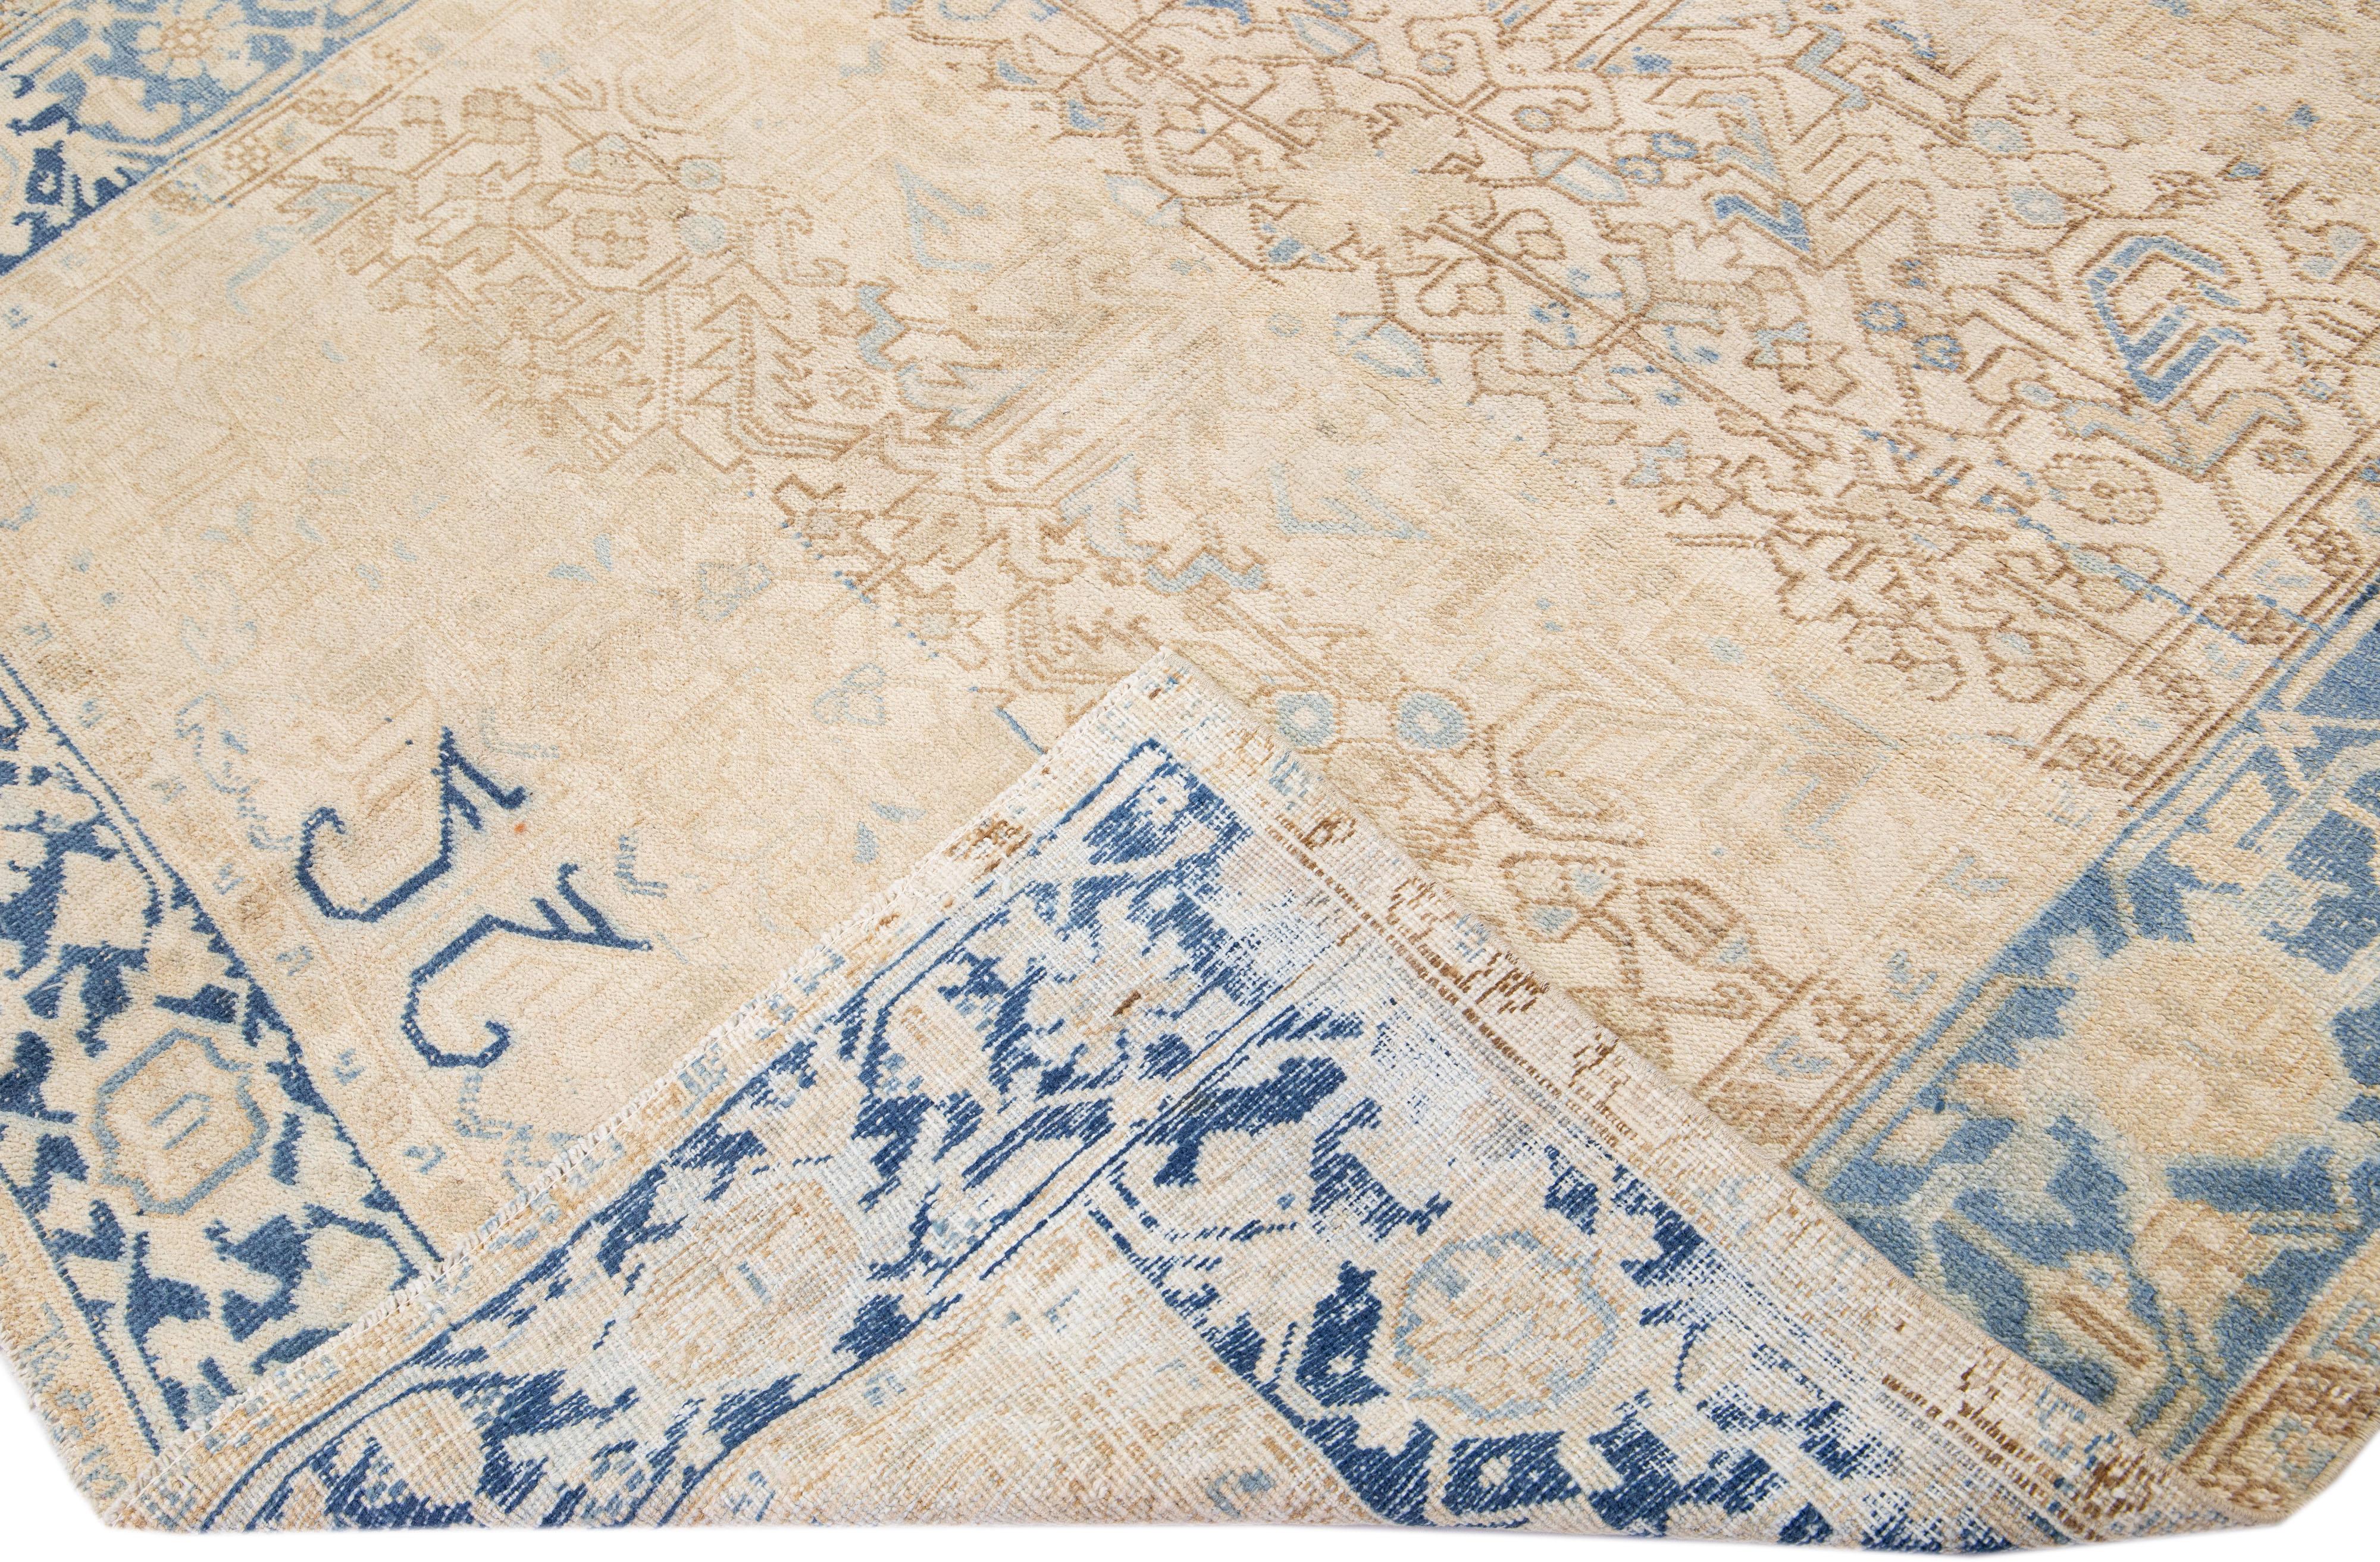 Beautiful antique Heriz hand-knotted wool rug with a beige color field. This Persian rug has a blue frame and accents in a gorgeous all-over geometric design.

This rug measures: 7'1